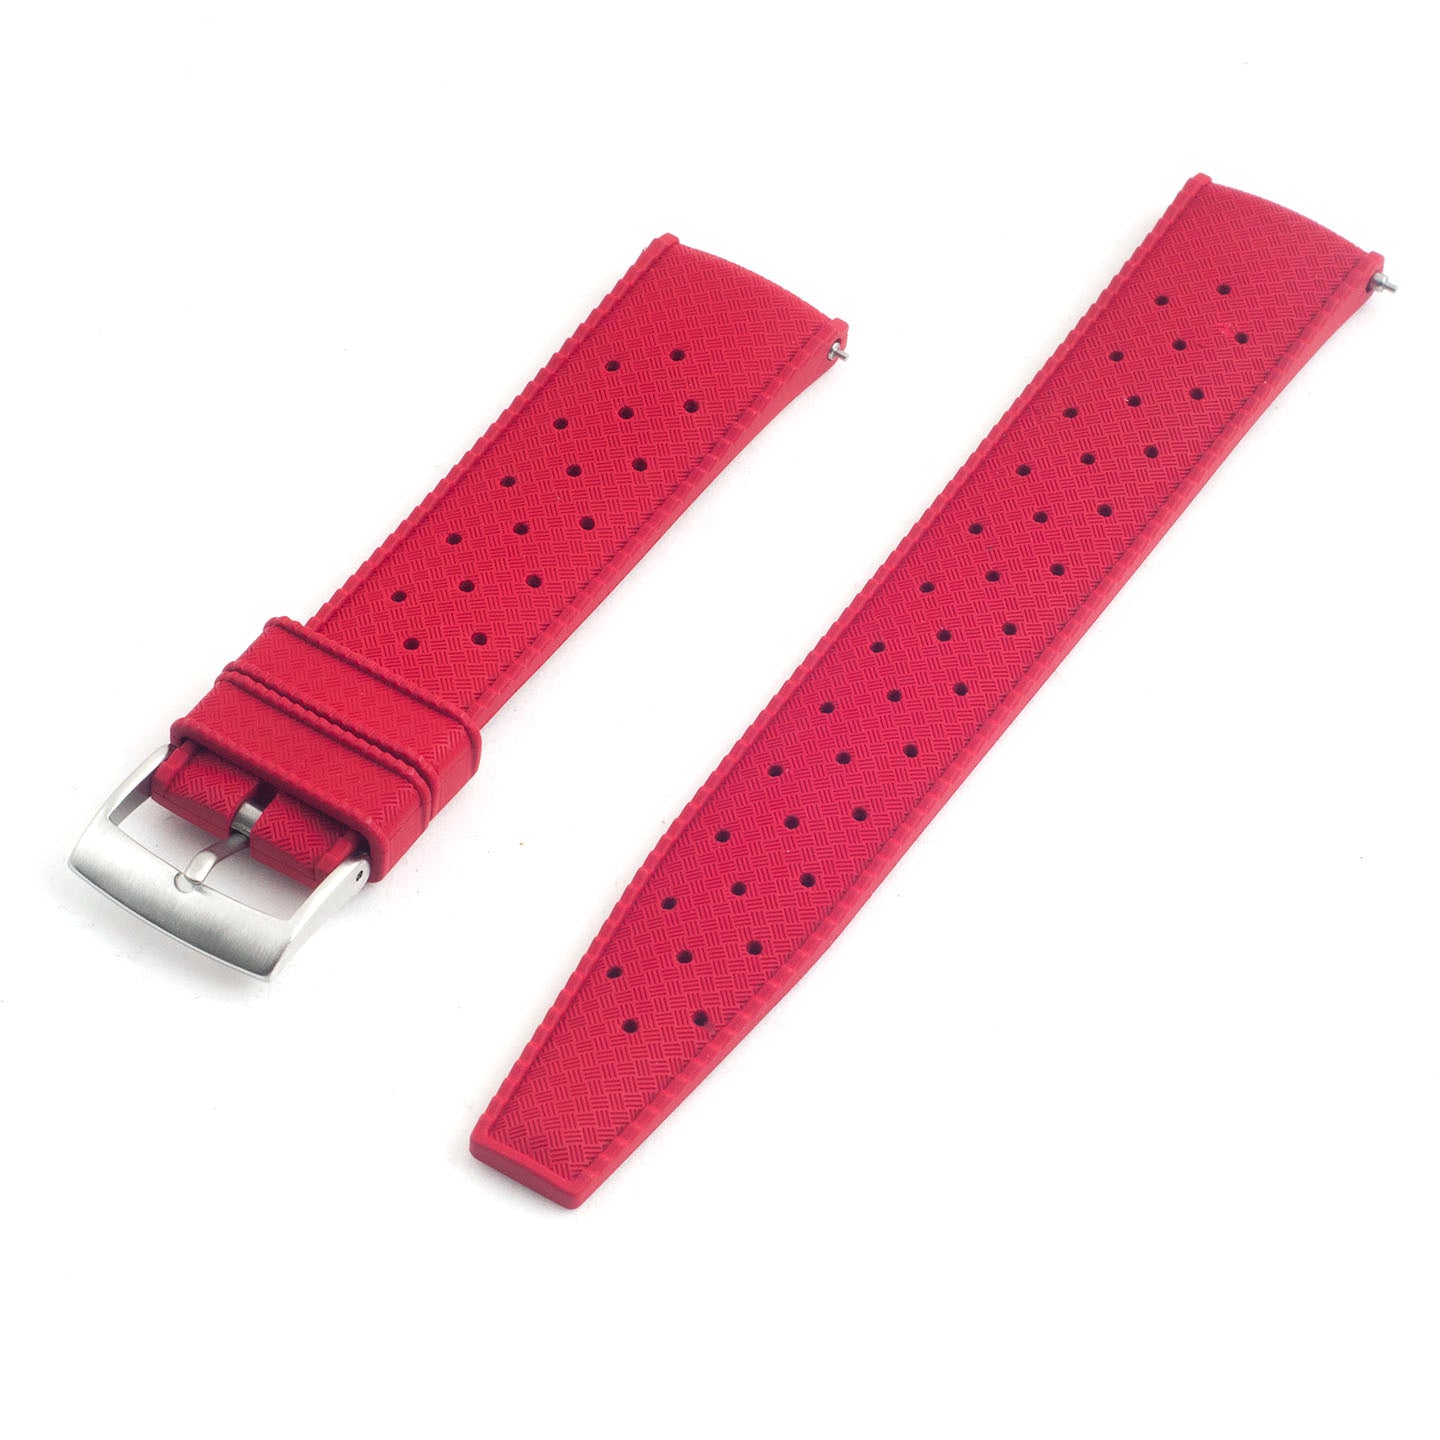 Tropical retro vintage replacement watch strap band FKM rubber tropic 19mm 20mm 21mm 22mm red